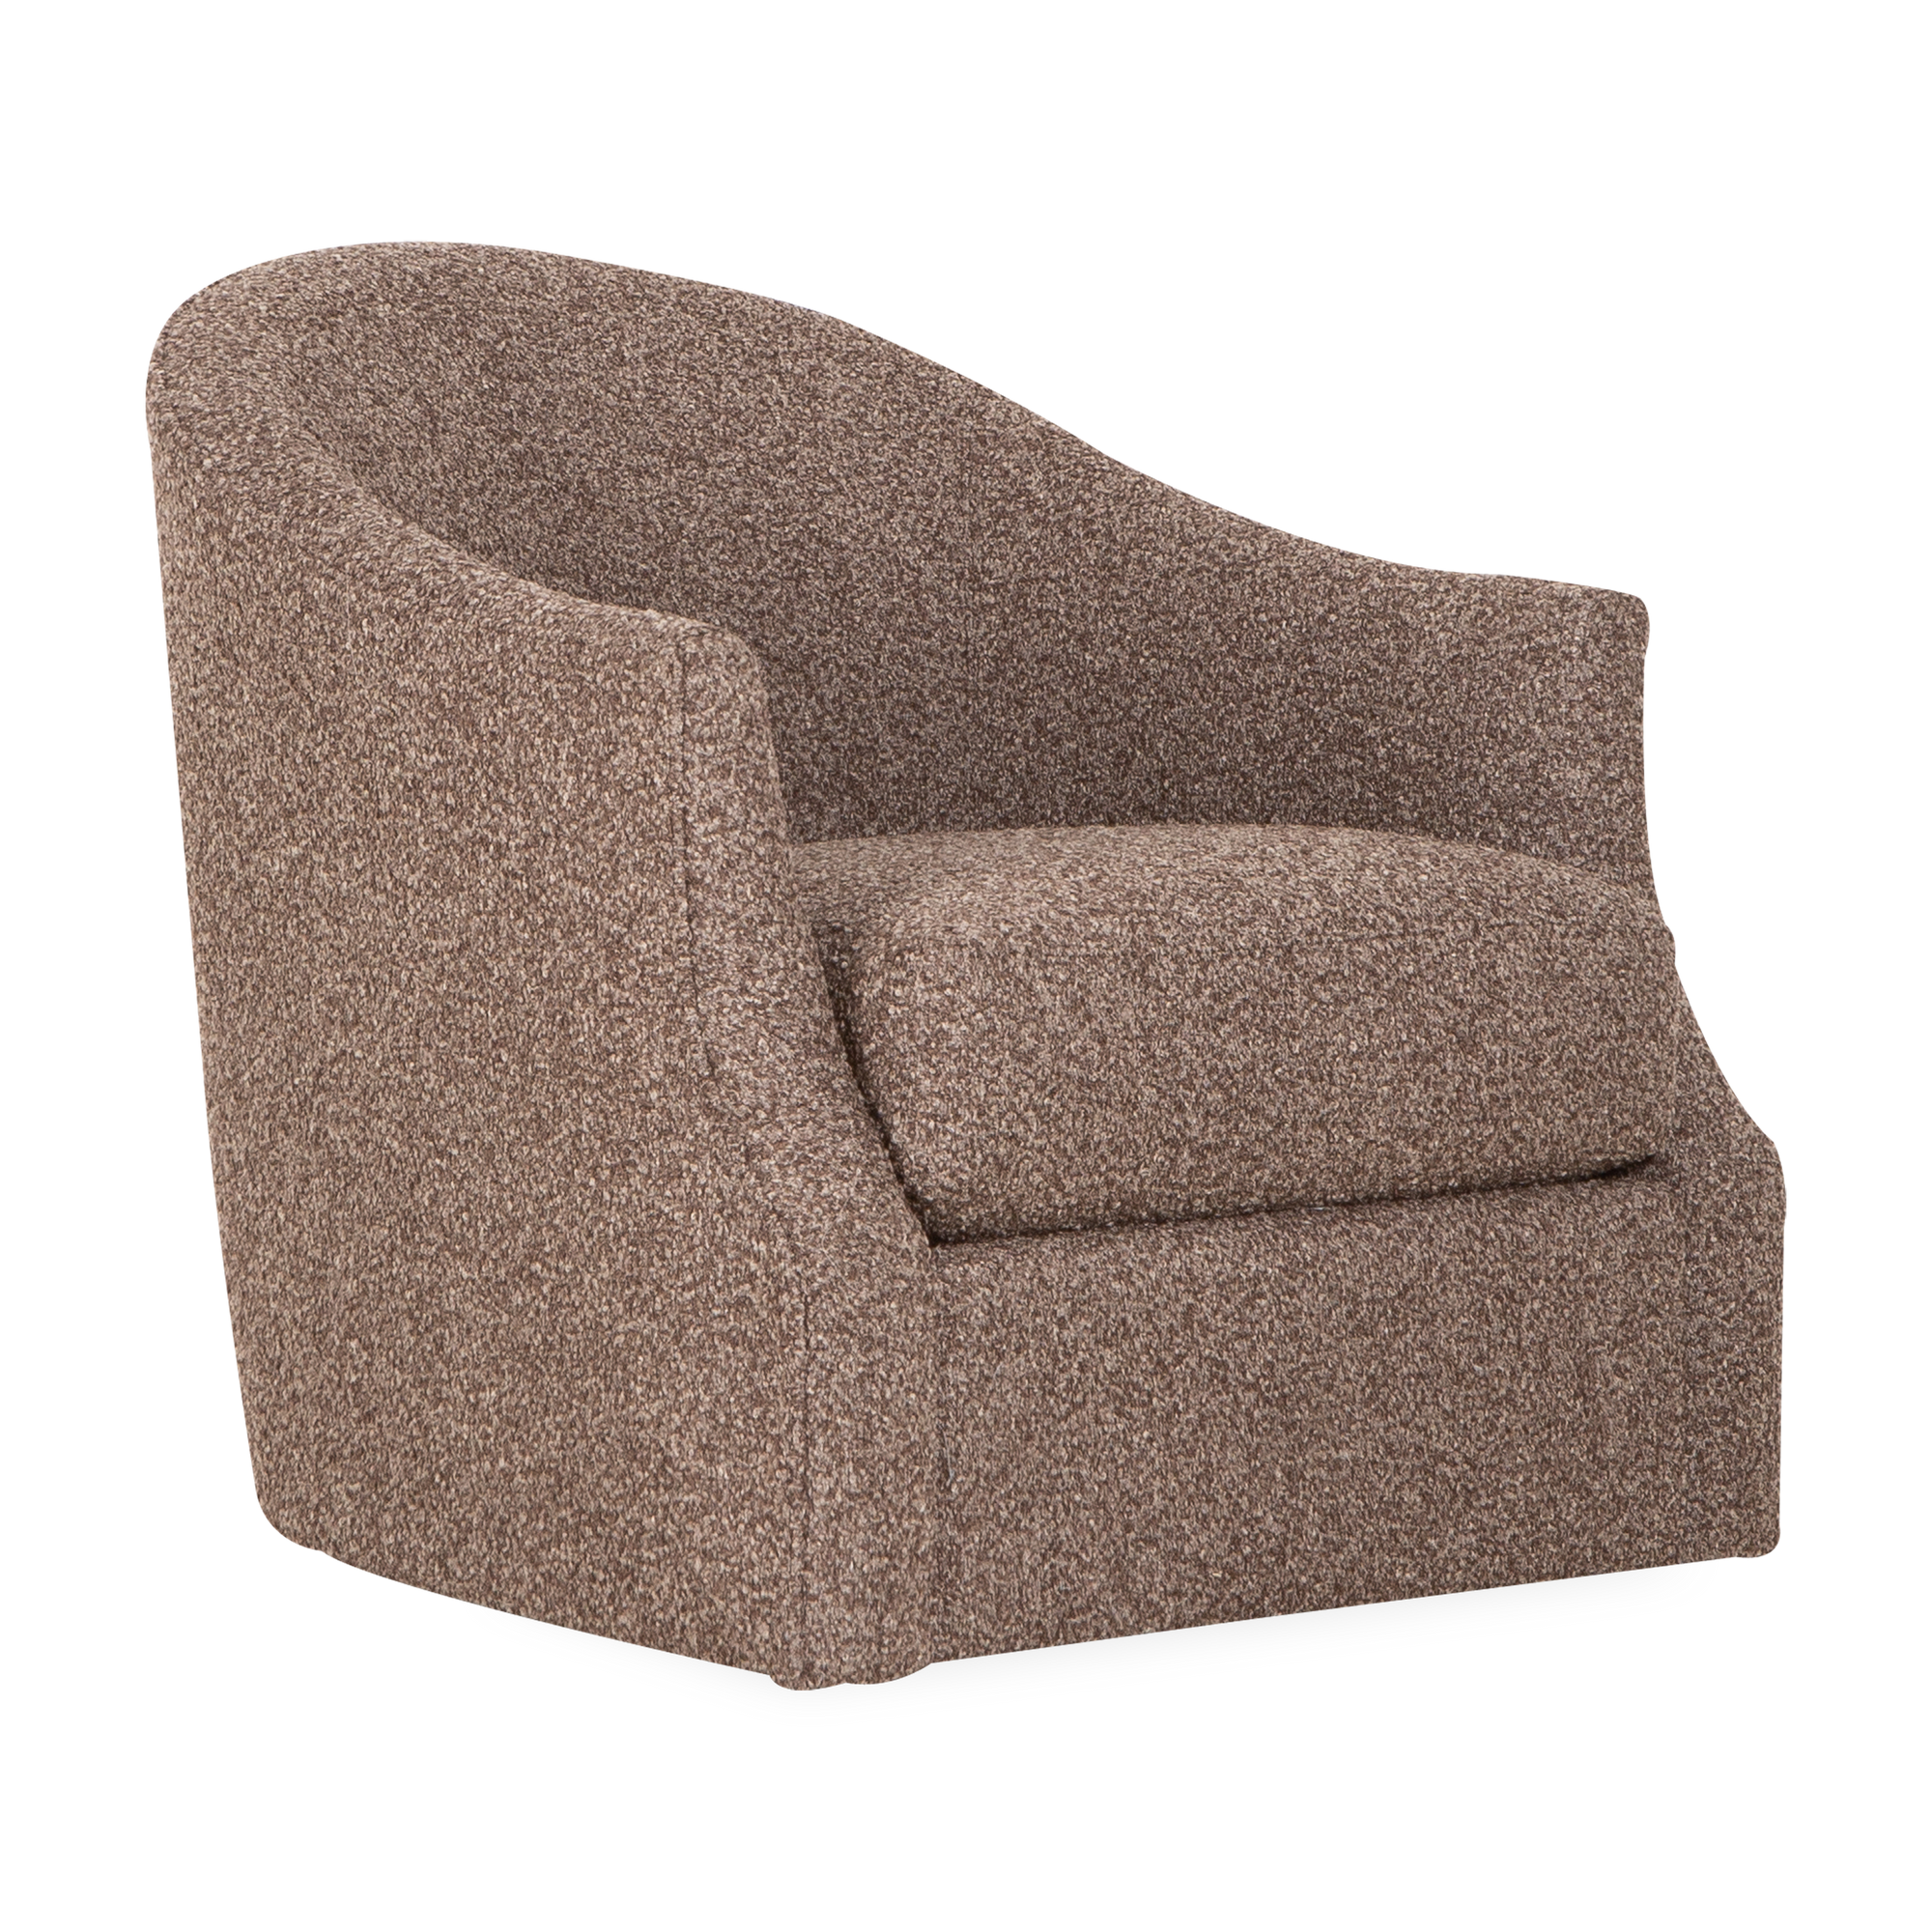 Curvaceous and cozy, the Colt Swivel Chair provides the ultimate comfort.